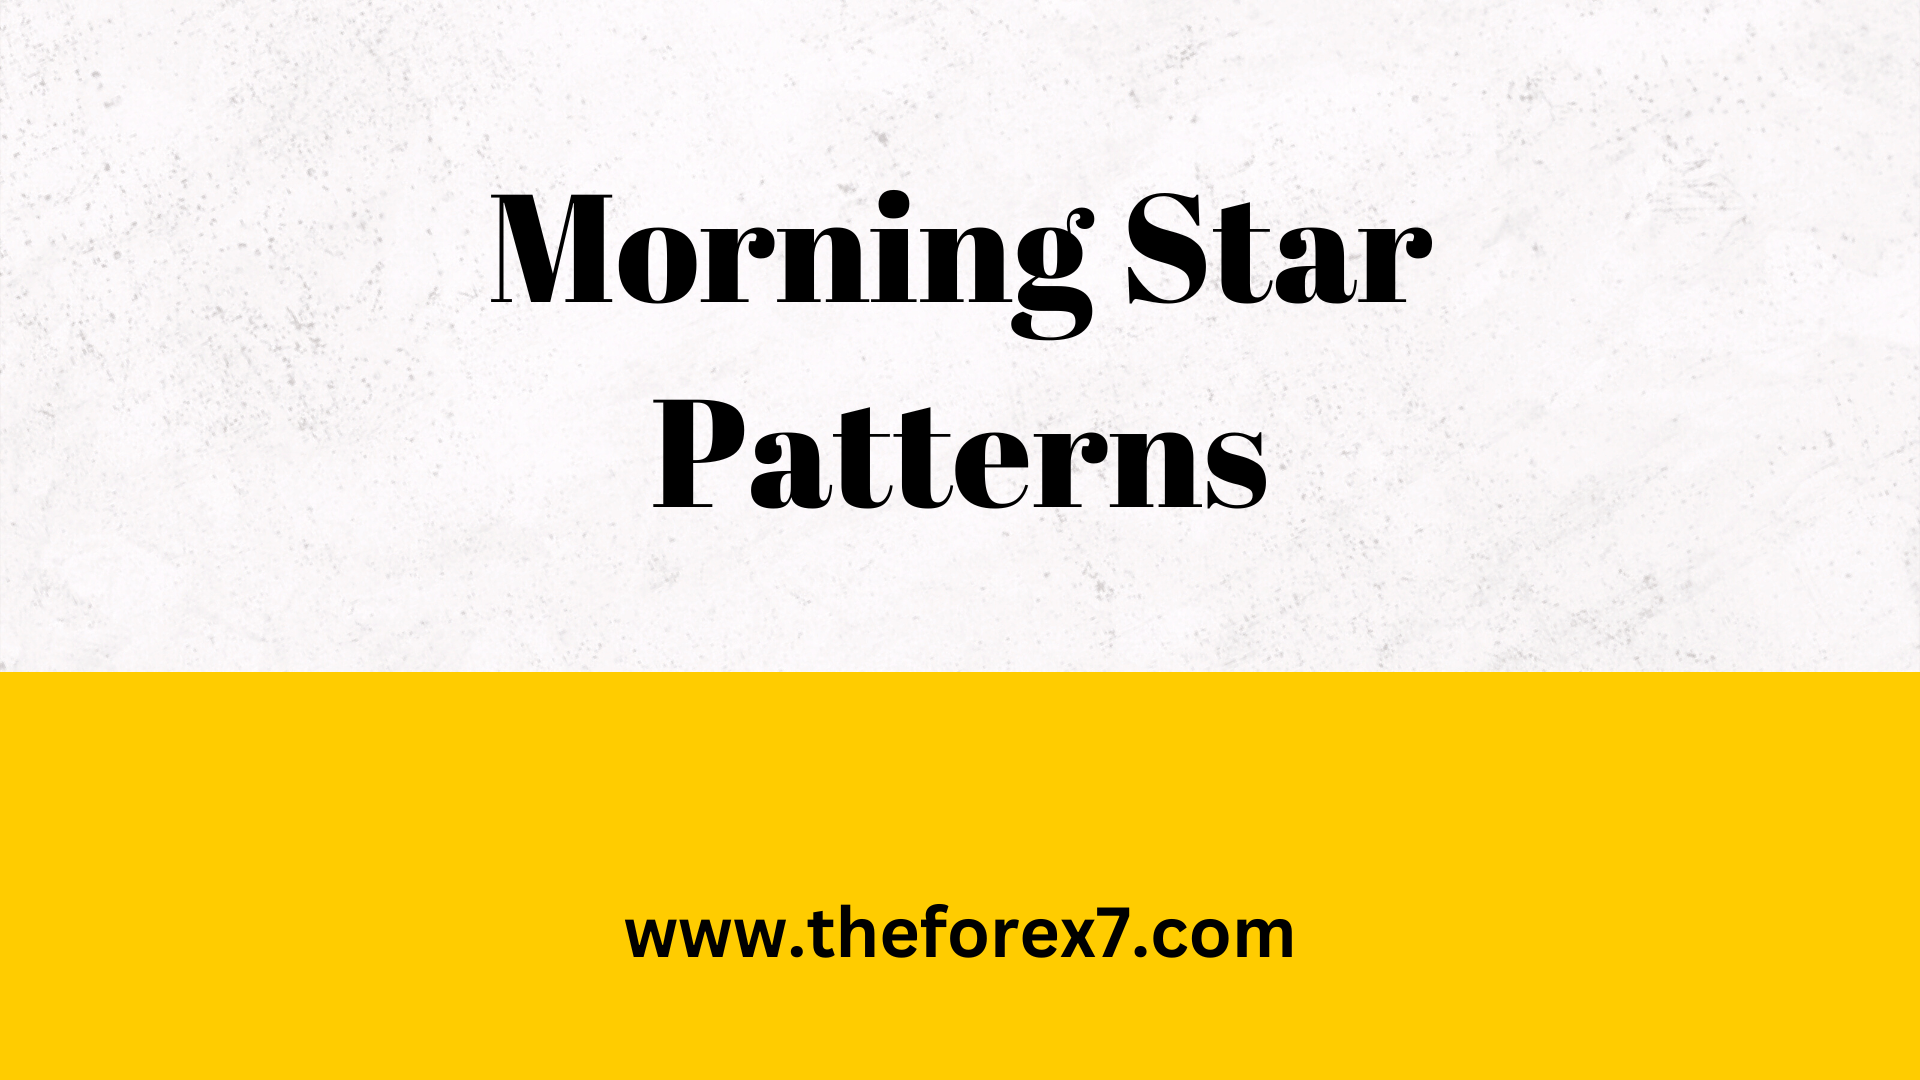 Testing the Parameters in Morning Stars